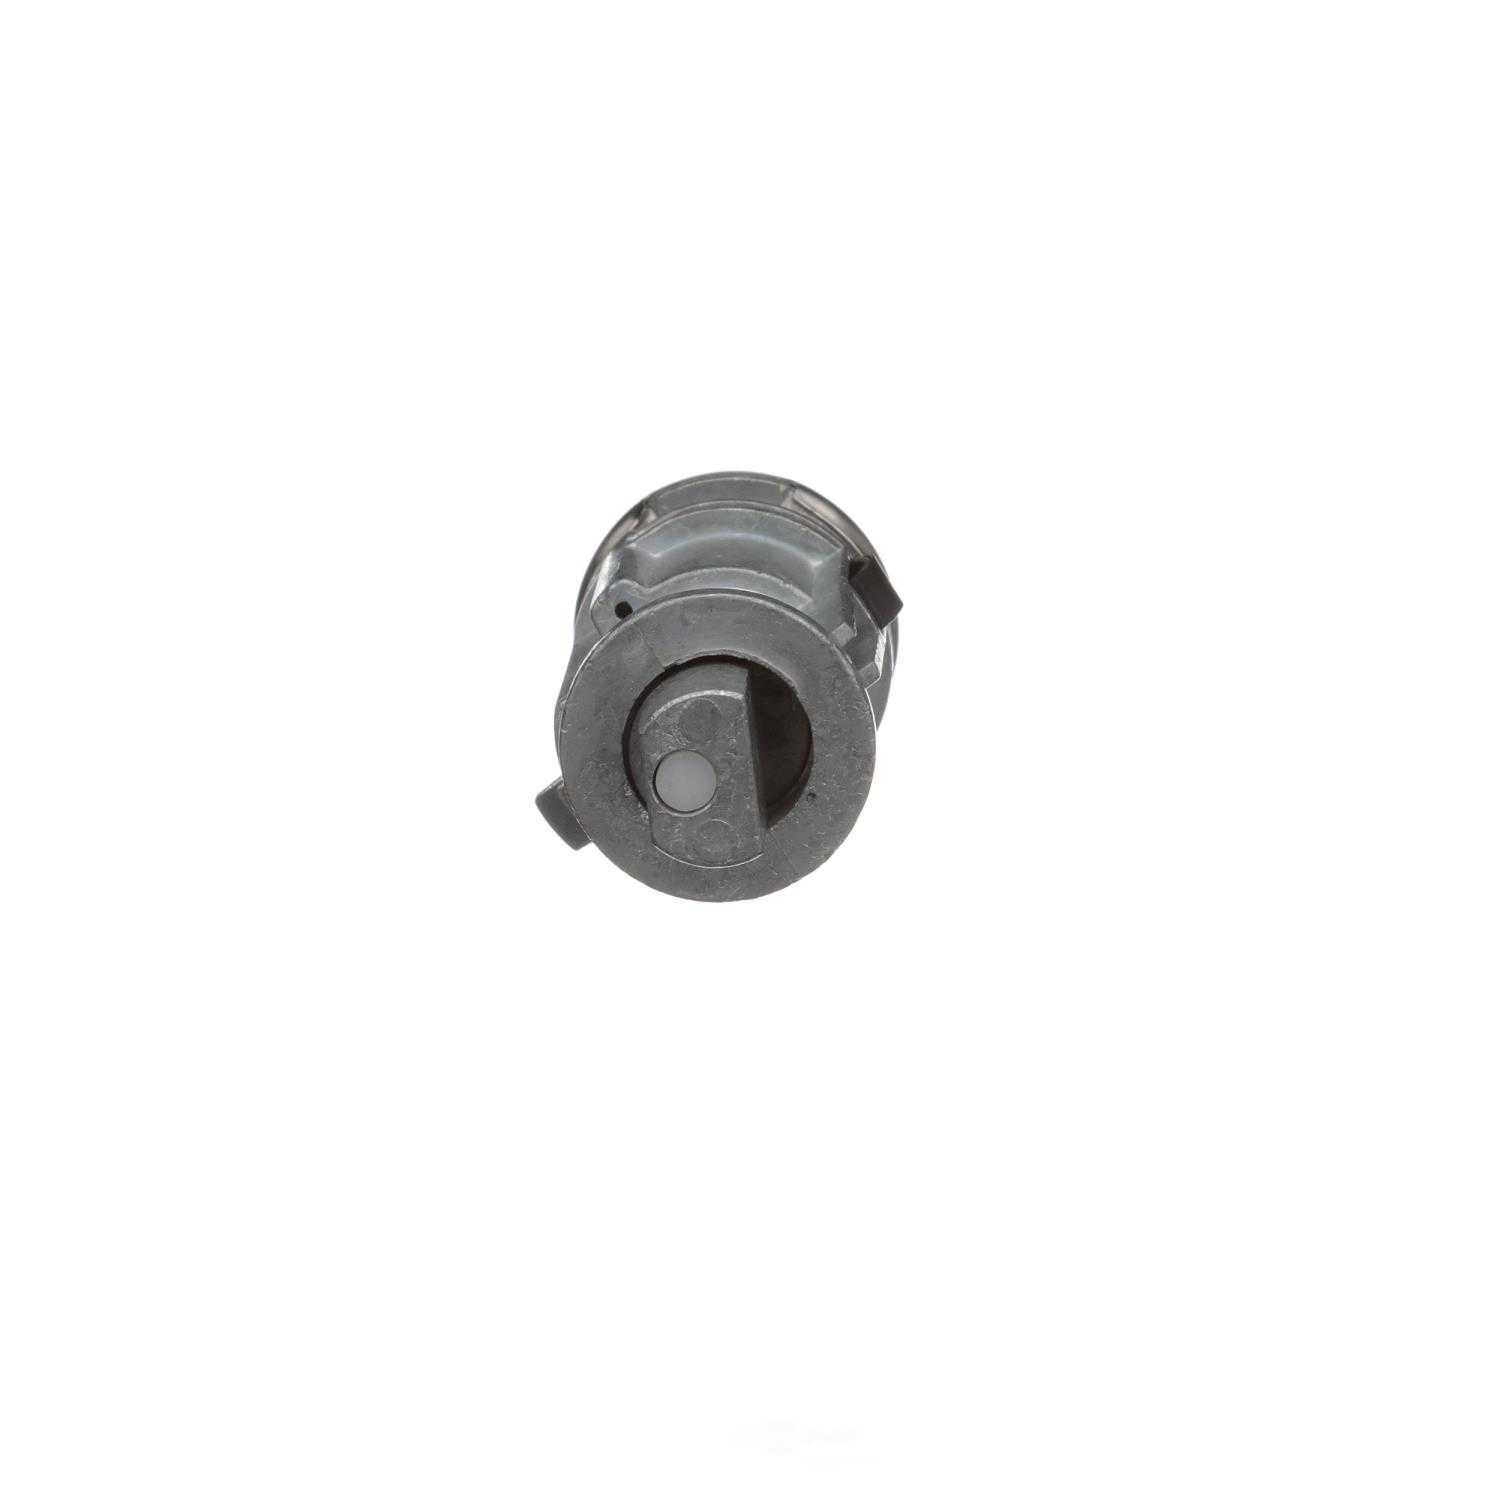 STANDARD MOTOR PRODUCTS - Ignition Lock Cylinder - STA US657L